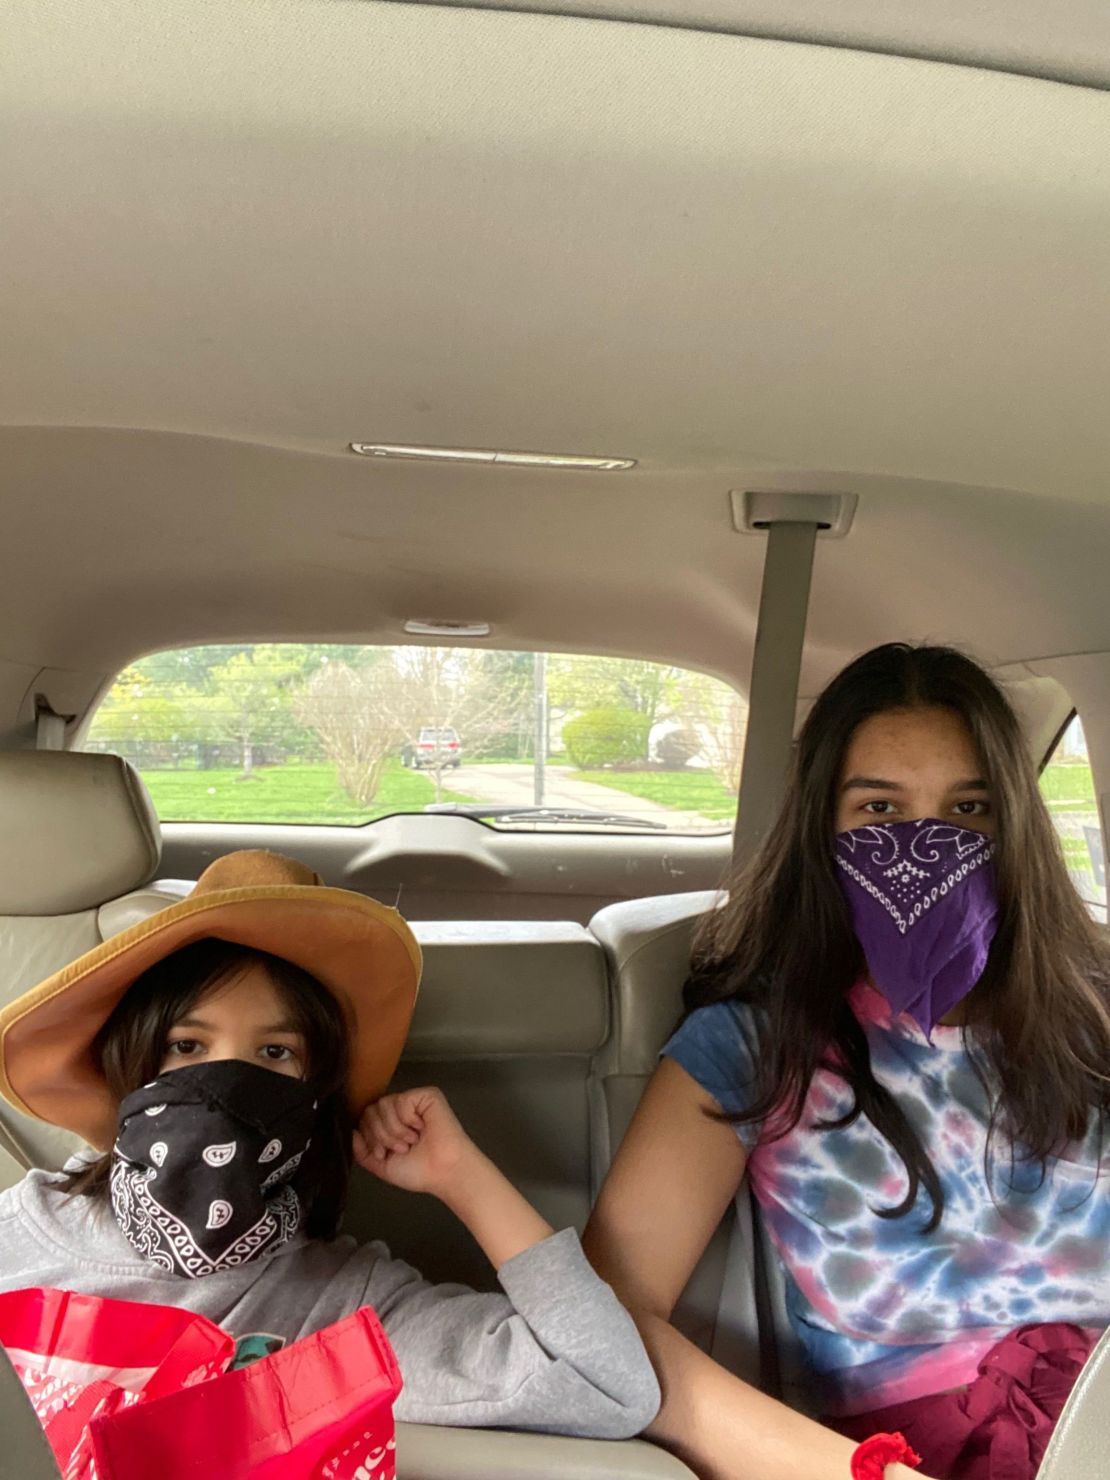 My masked daughters, 8 and 15, prepared for an outing.